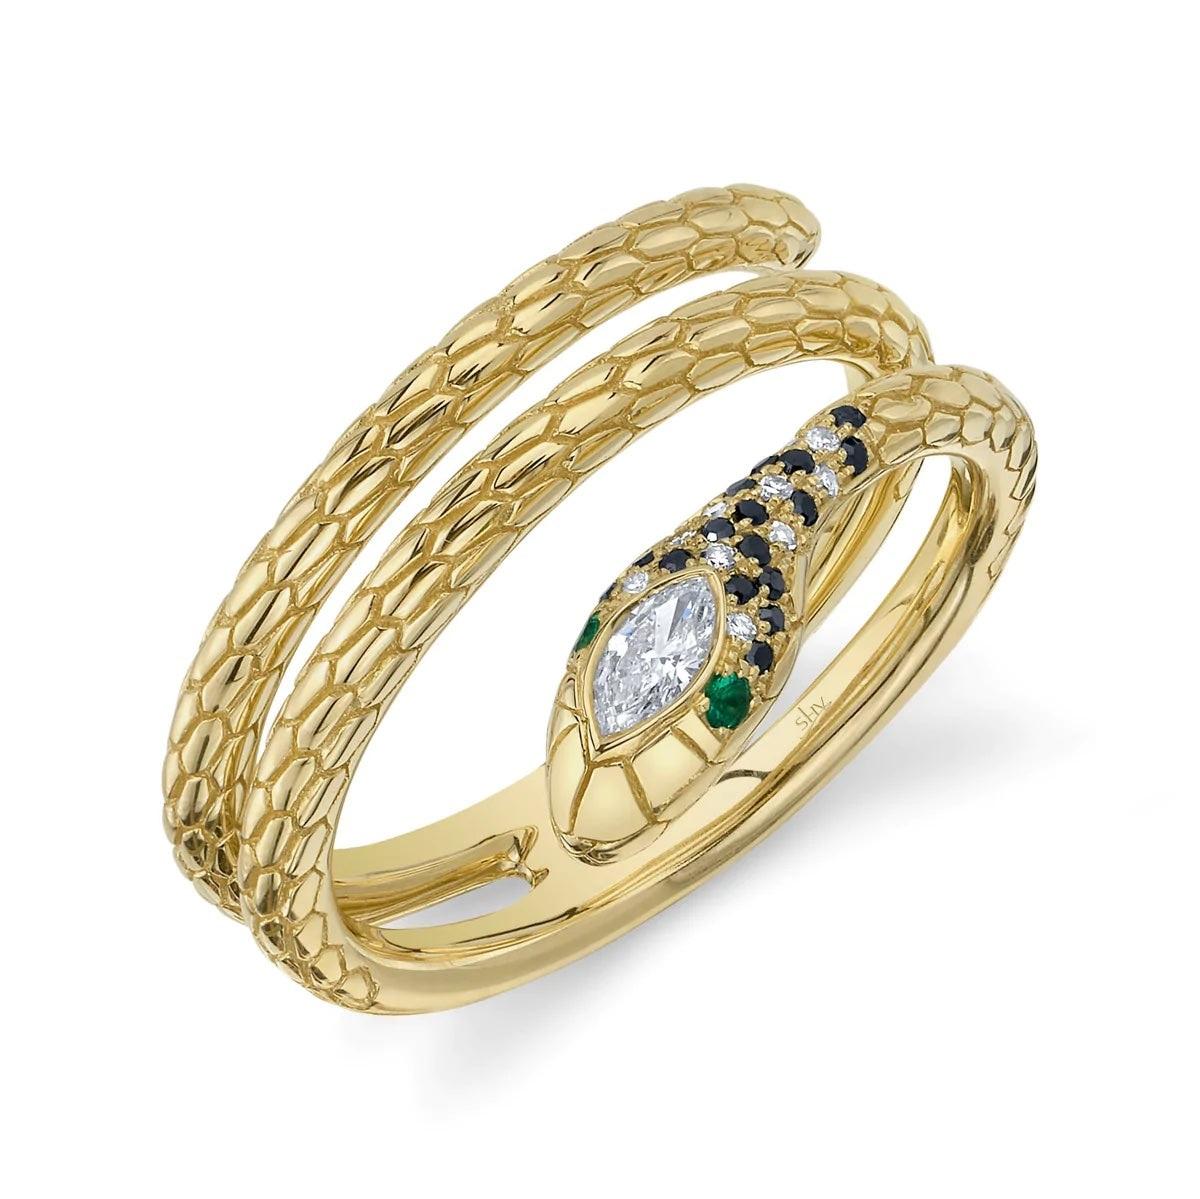 14kt yellow gold snake ring with black and white diamond (0.17ct total weight) scales and emerald eyes (00.2ct total weight). Size 7.

